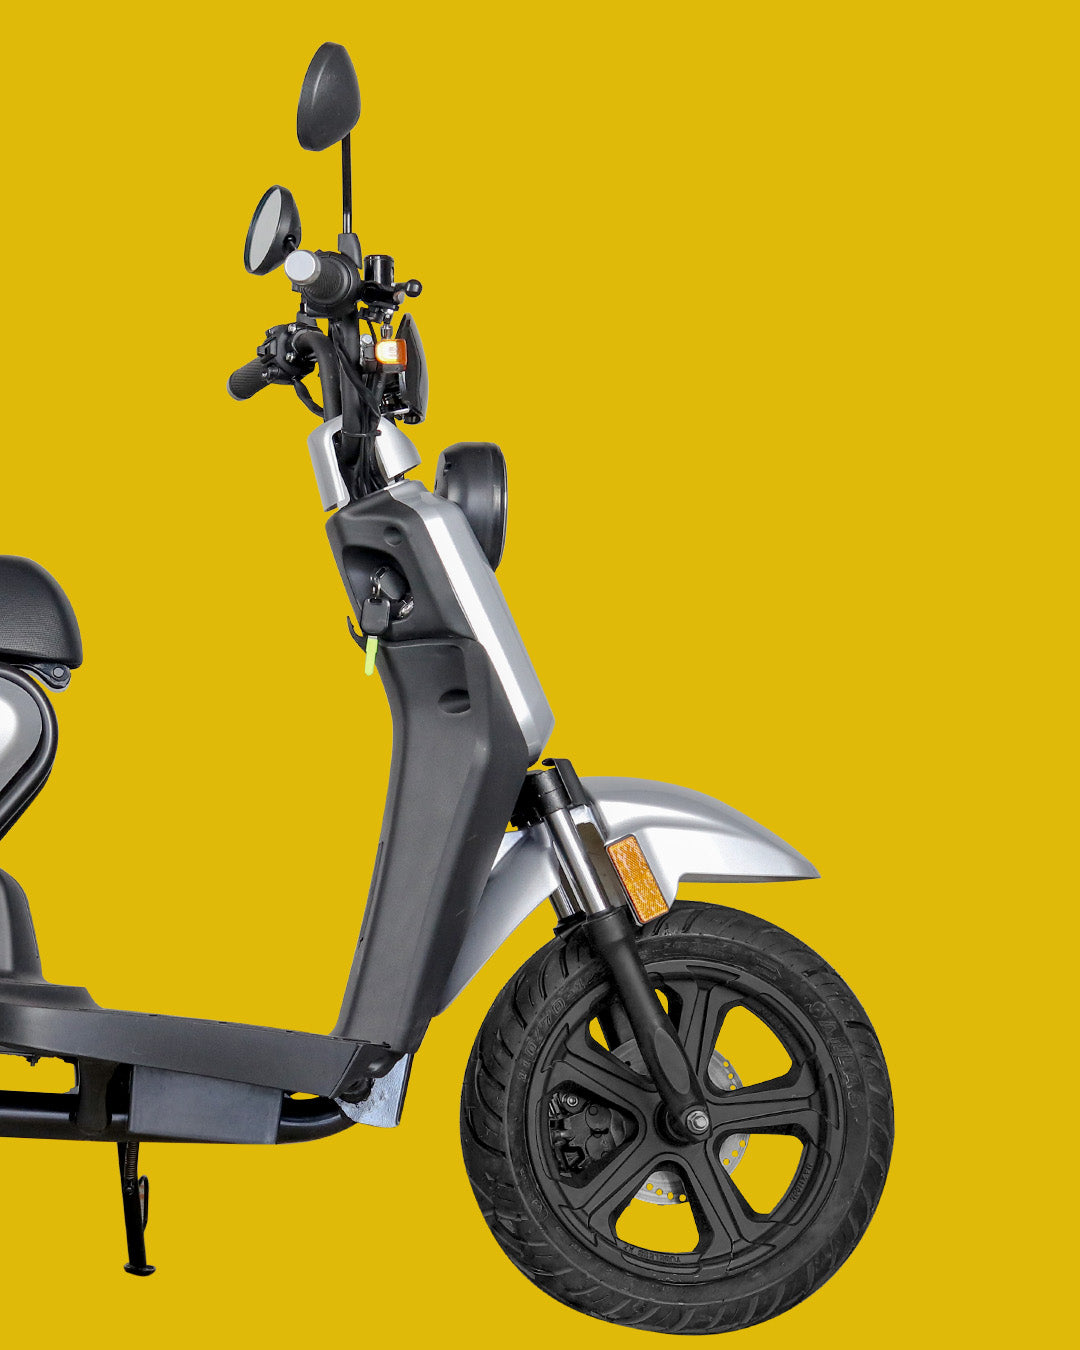 VS5 - Volta Motor Electric Scooter front part view